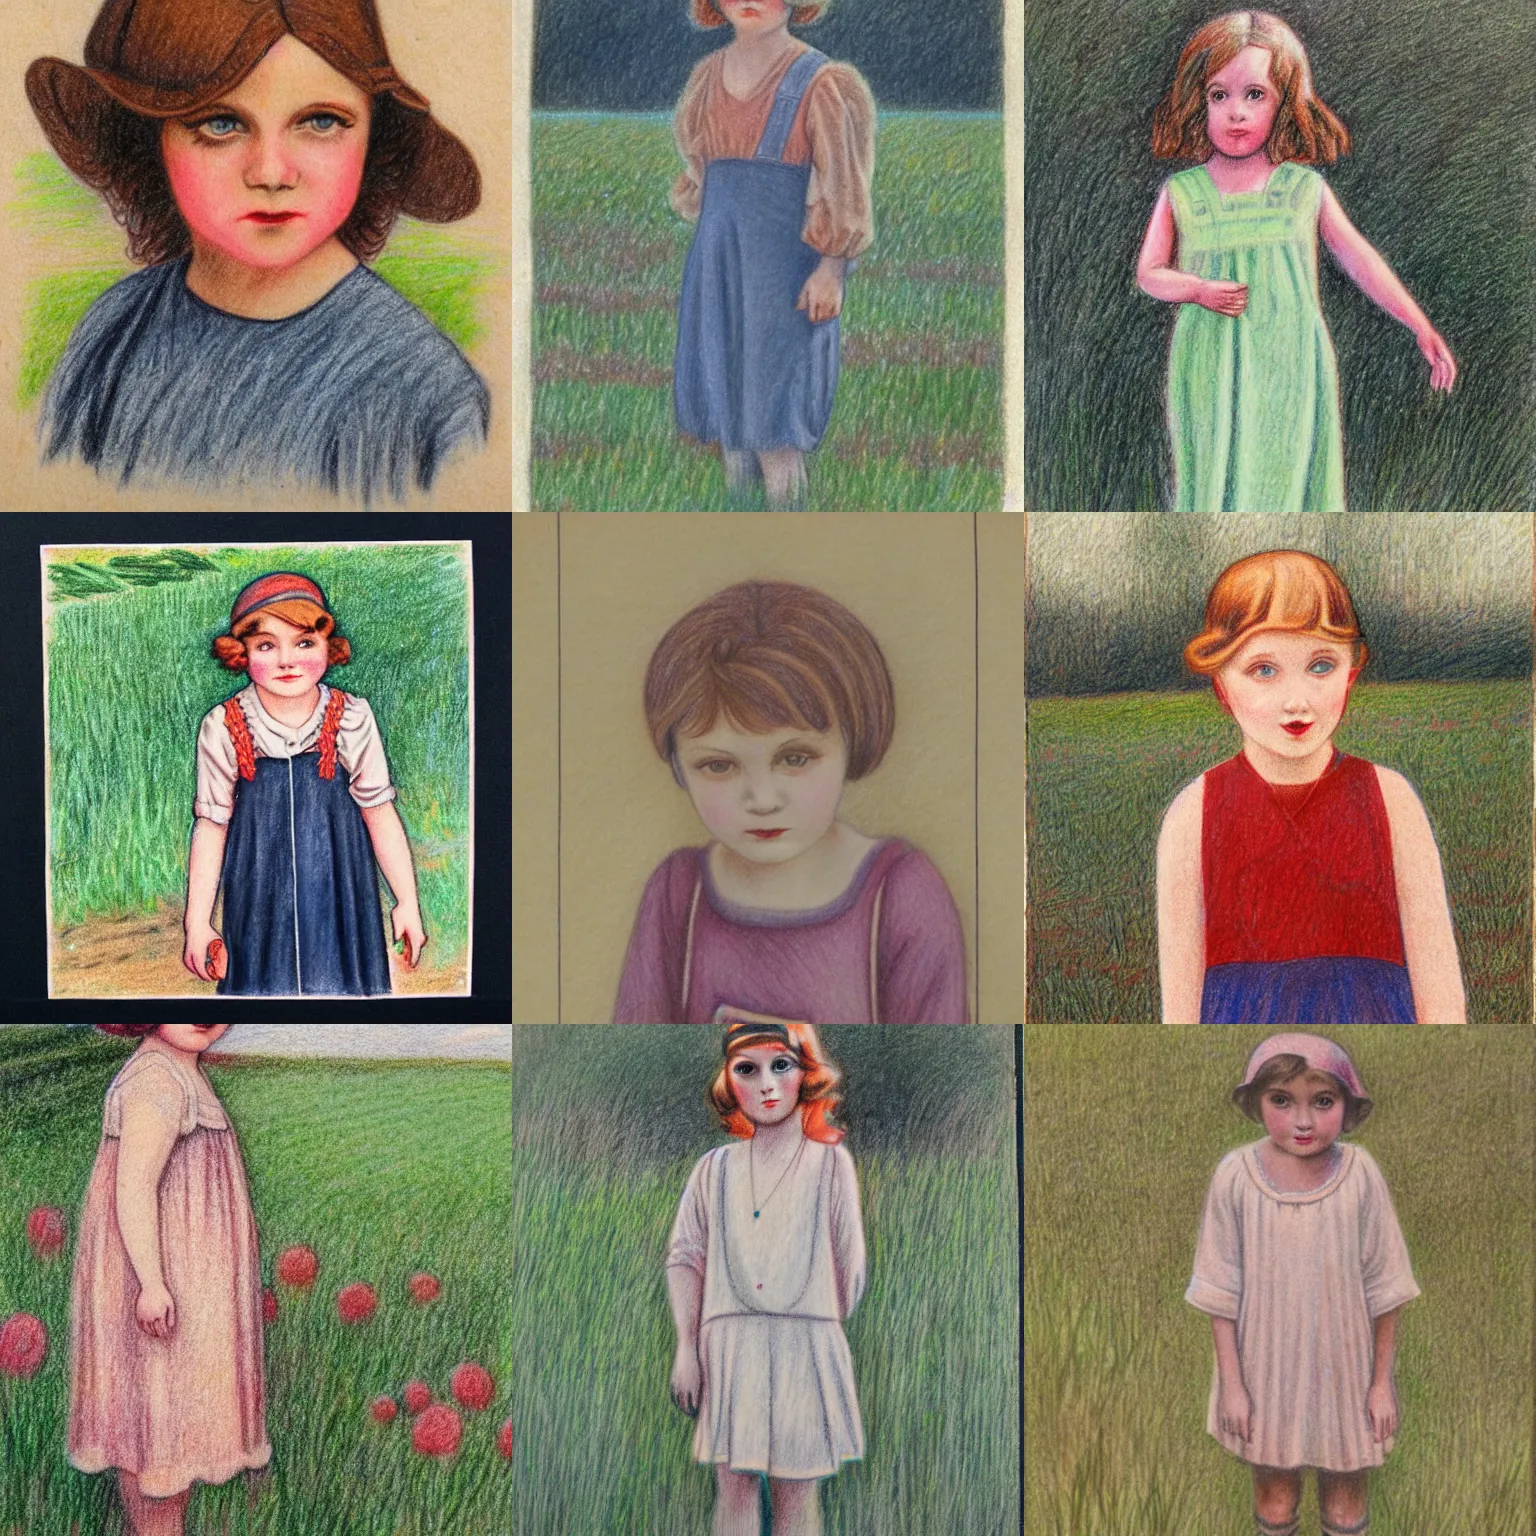 Prompt: 1 9 2 0 s portrait colored pencil drawing of curious girl standing in field looking at camera.